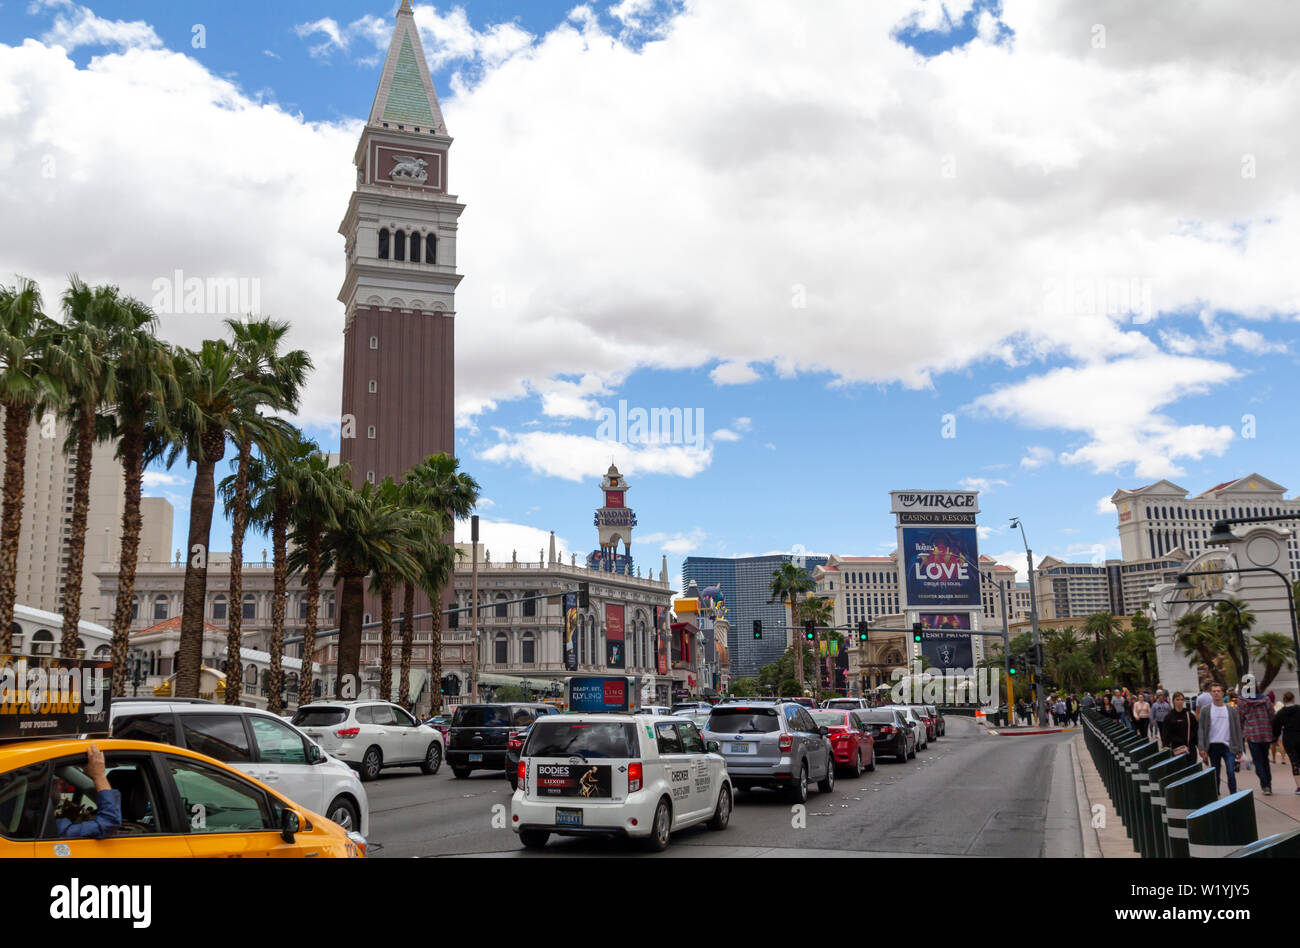 Las Vegas Strip, casino and hotels city view at daytime from the street. Stock Photo